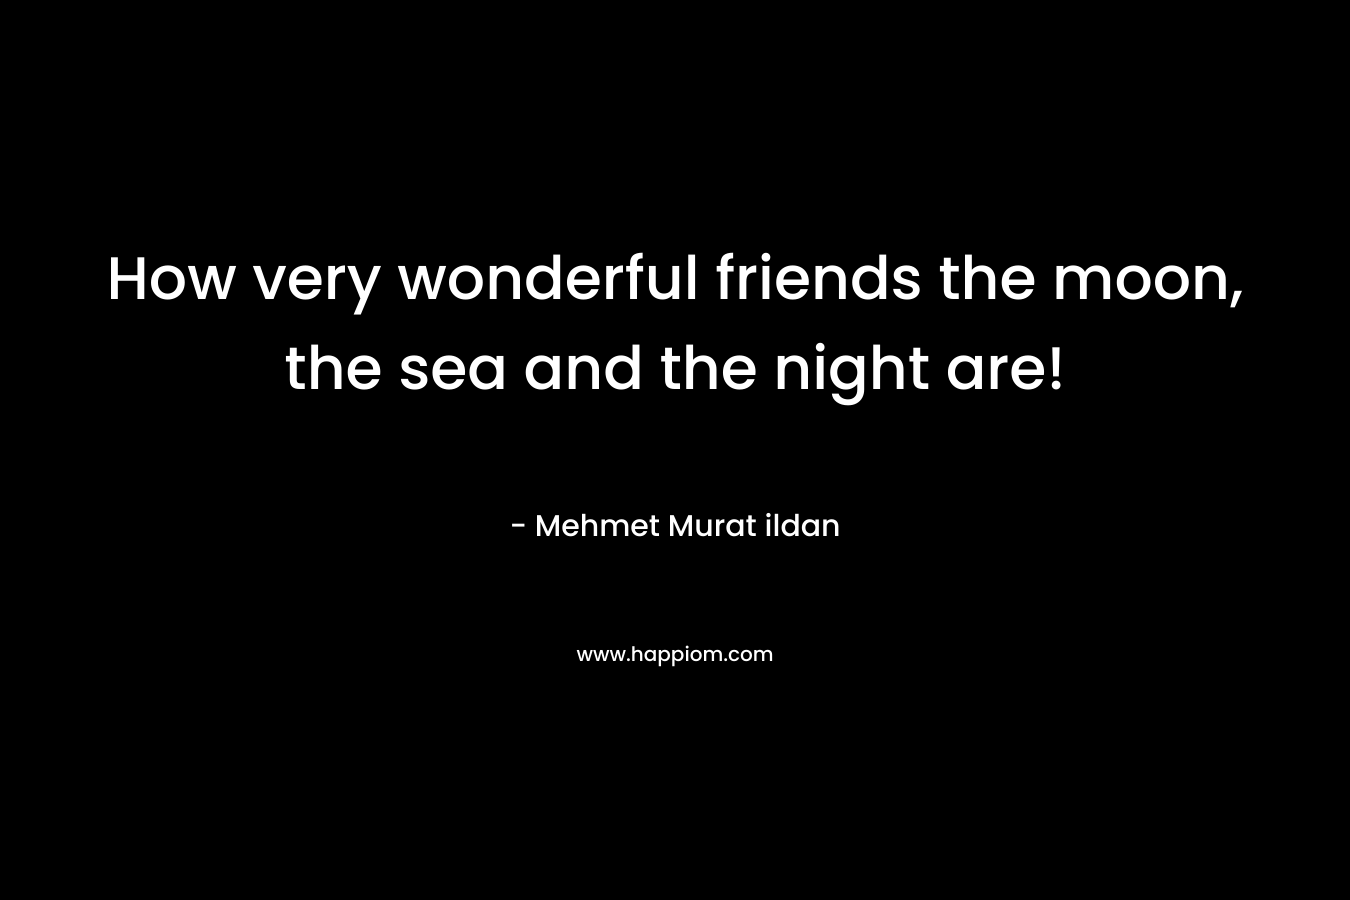 How very wonderful friends the moon, the sea and the night are!